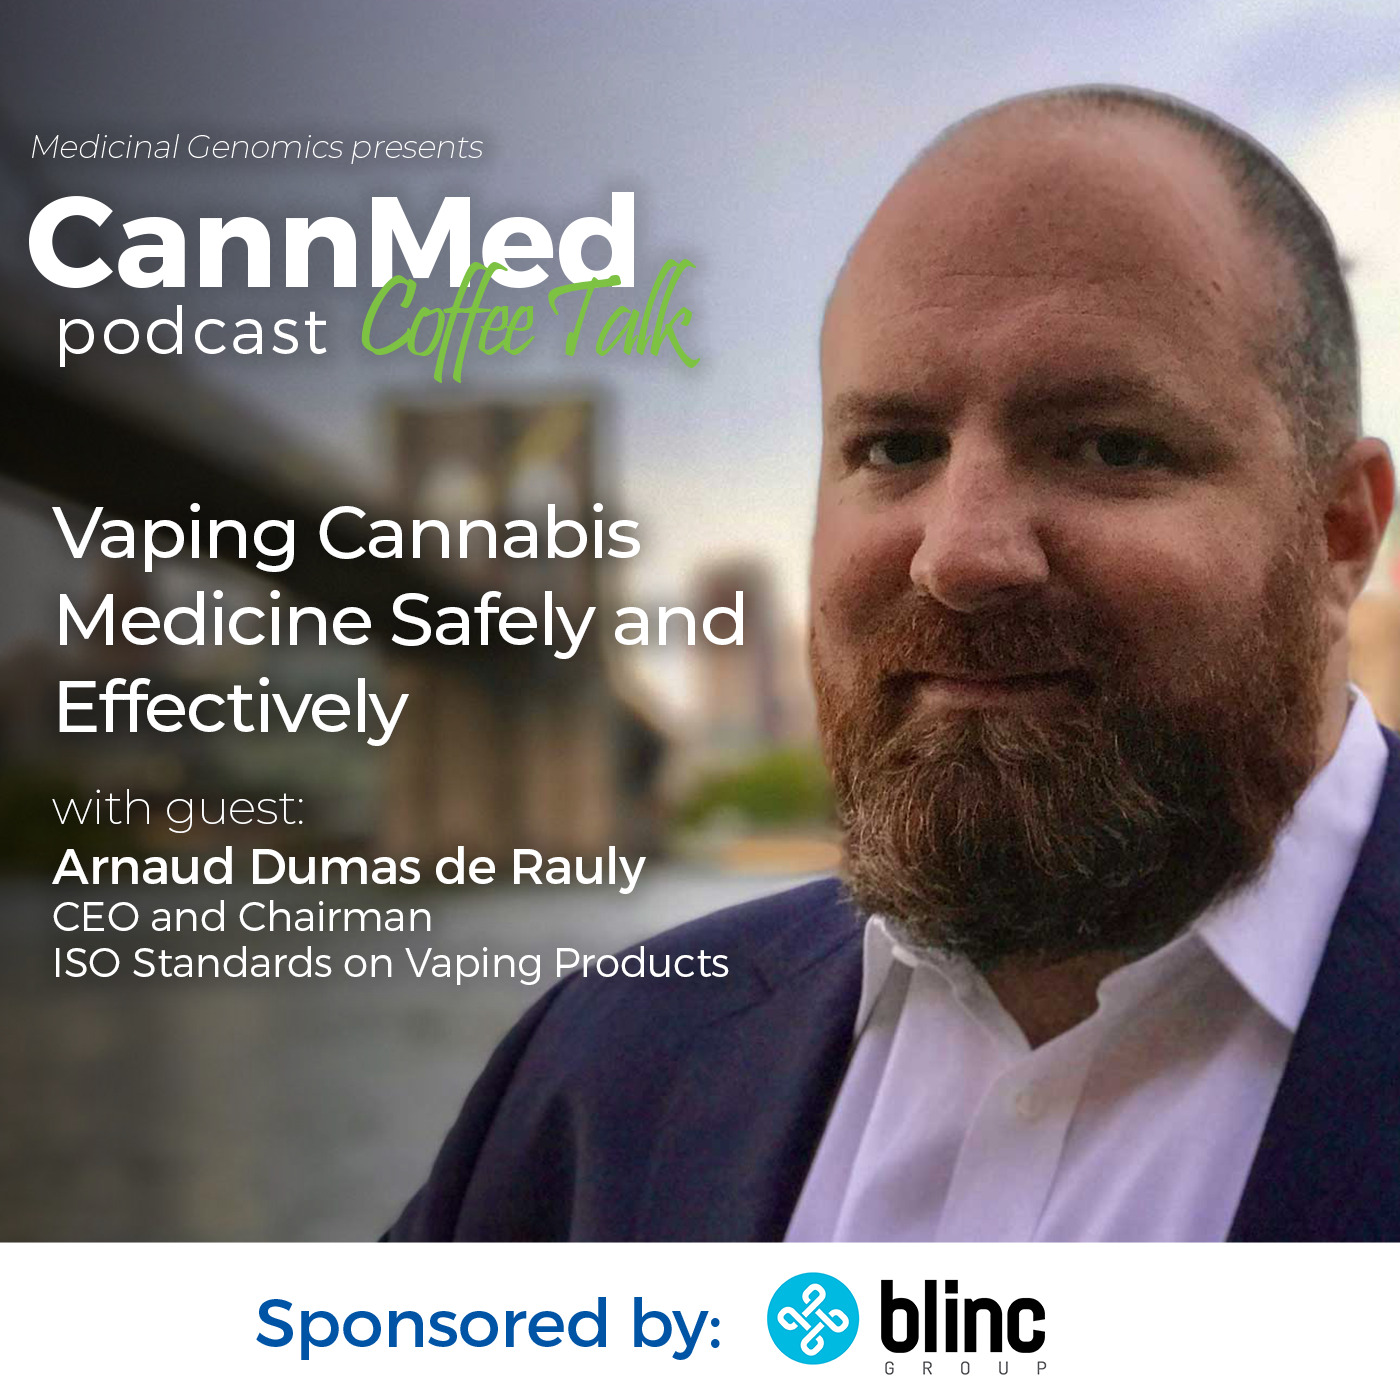 Featured image for “Vaping Cannabis Medicine Safely and Effectively with Arnaud Dumas de Rauly”